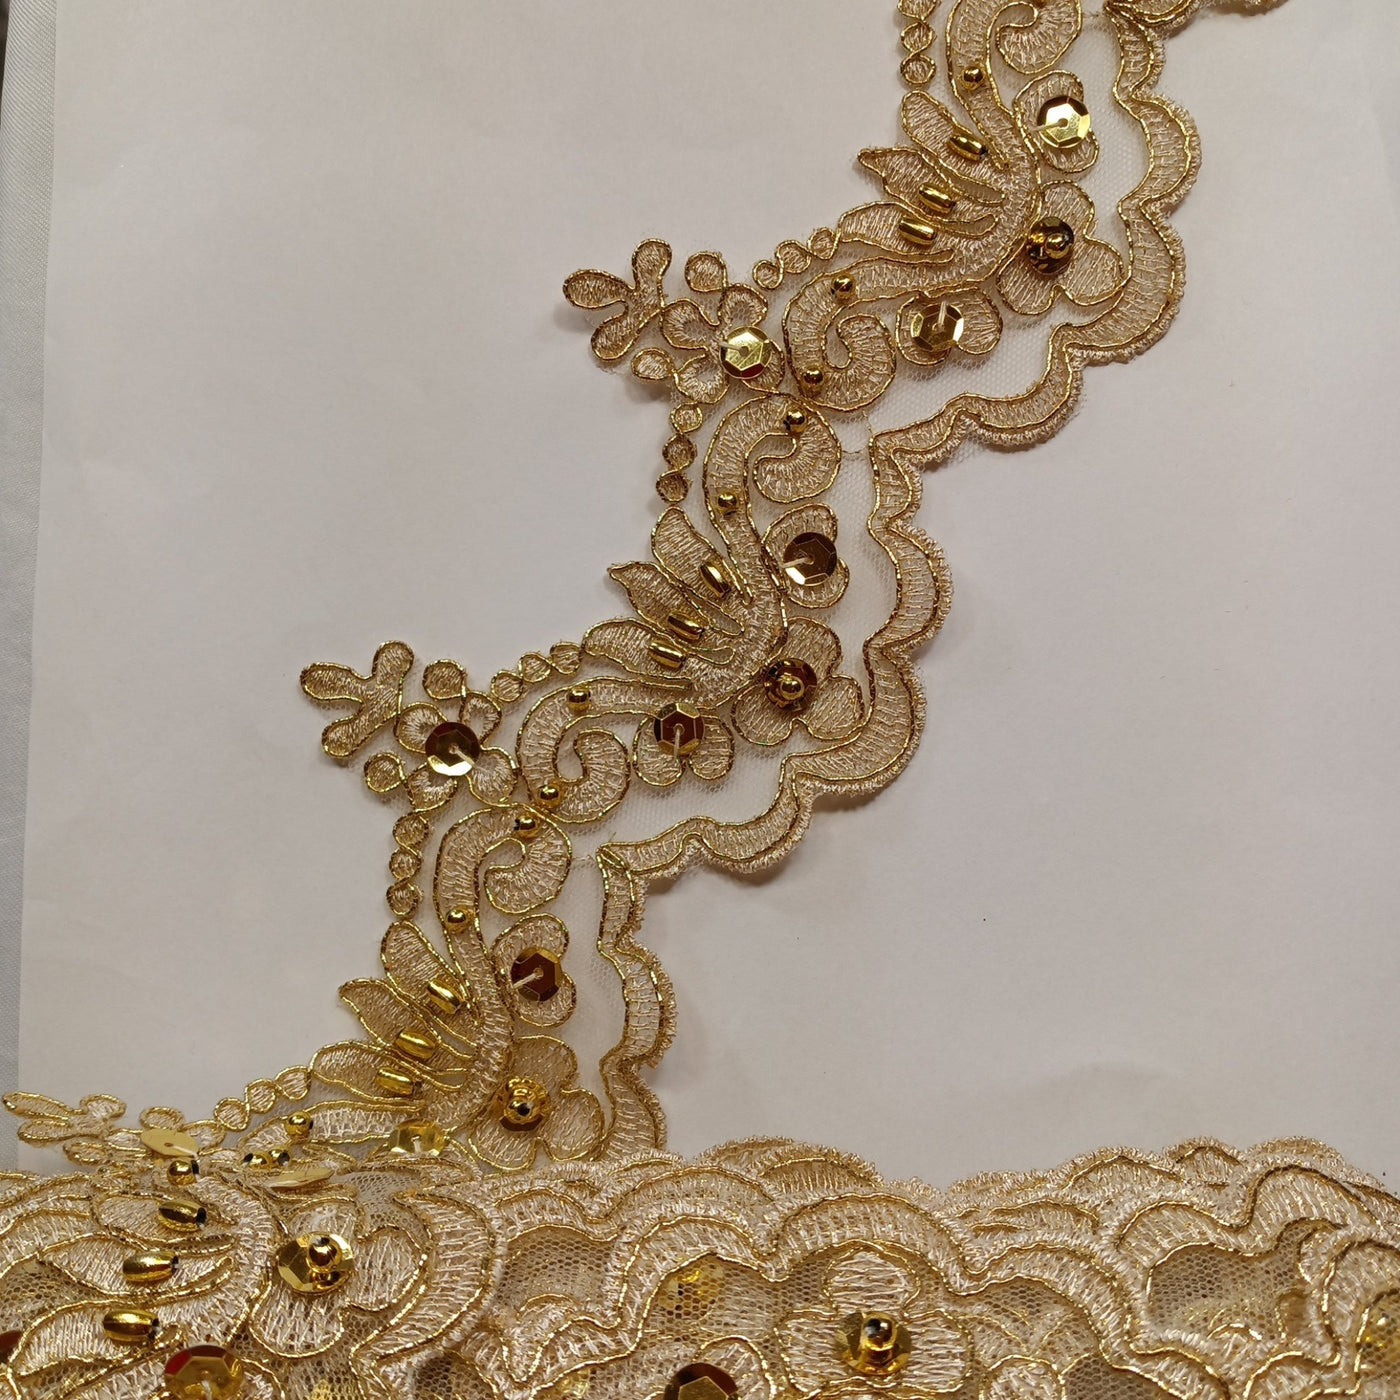 Corded, Beaded & Embroidered Metallic Gold Trimming. Lace Usa